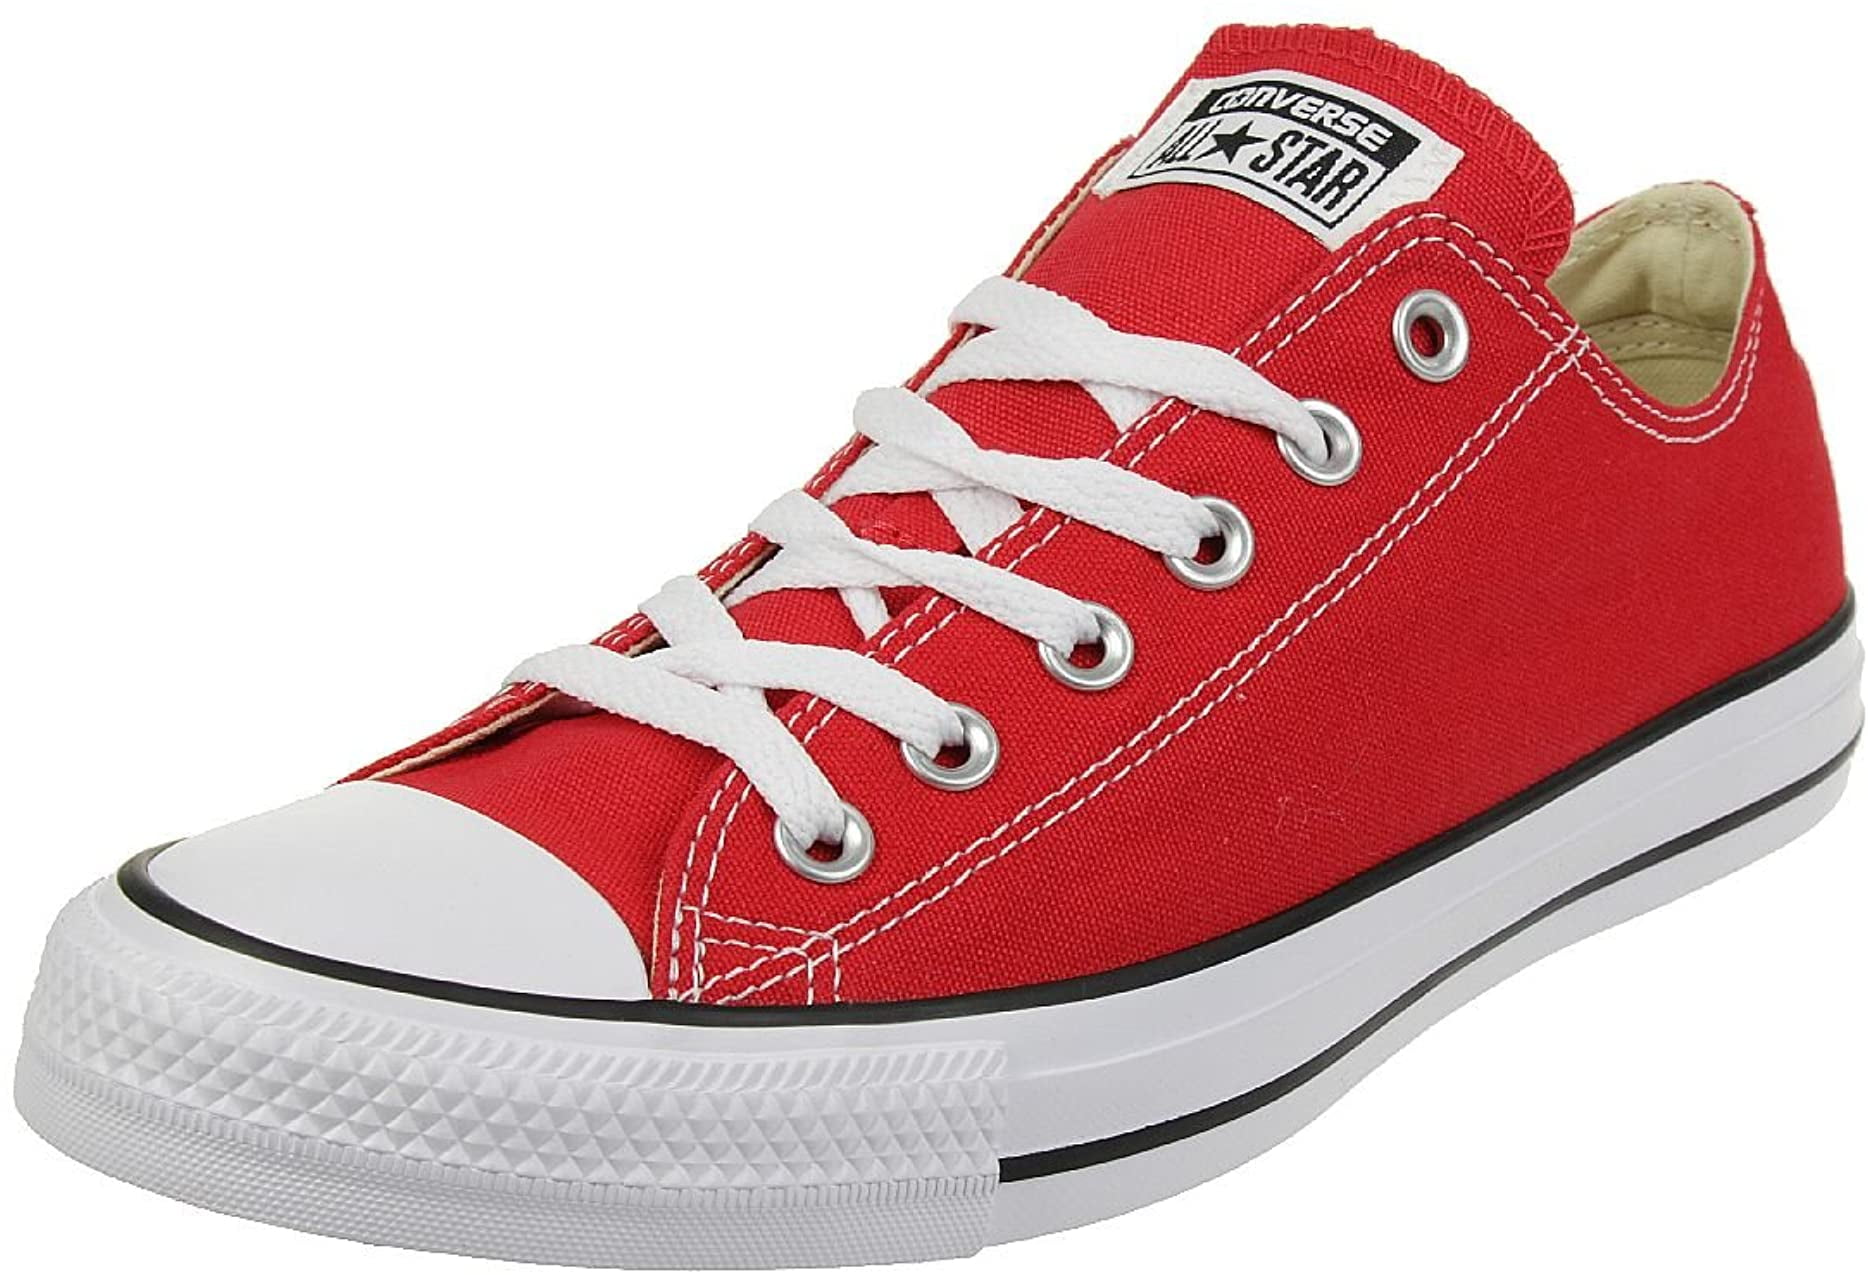 Converse Chuck Taylor All Star Low Ox Unisex Sneakers - Red 7.5M/9.5W - Walmart.com